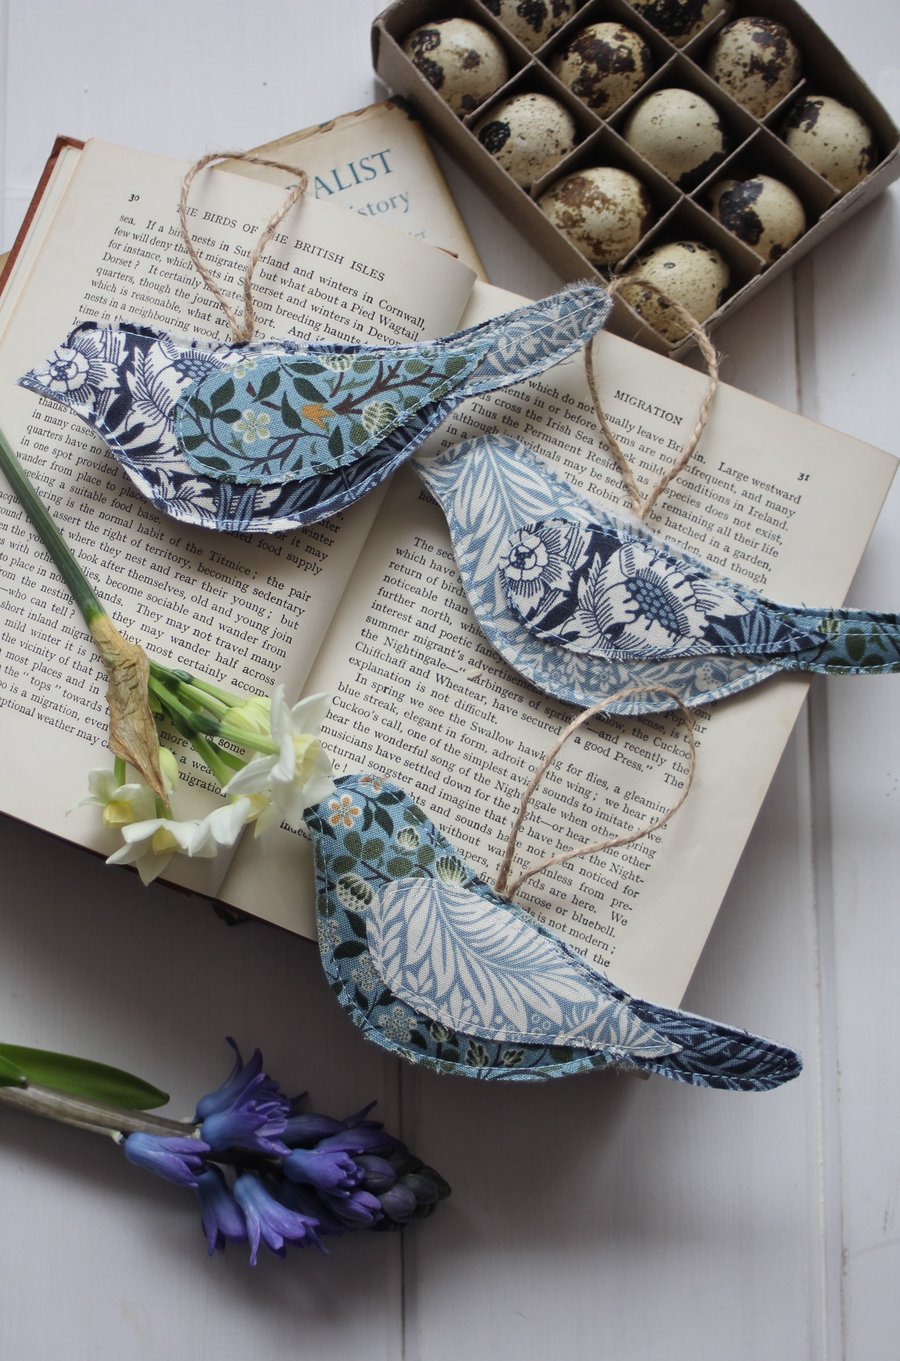 Bird trio made from V&A Museum William Morris fabric in shades of blue